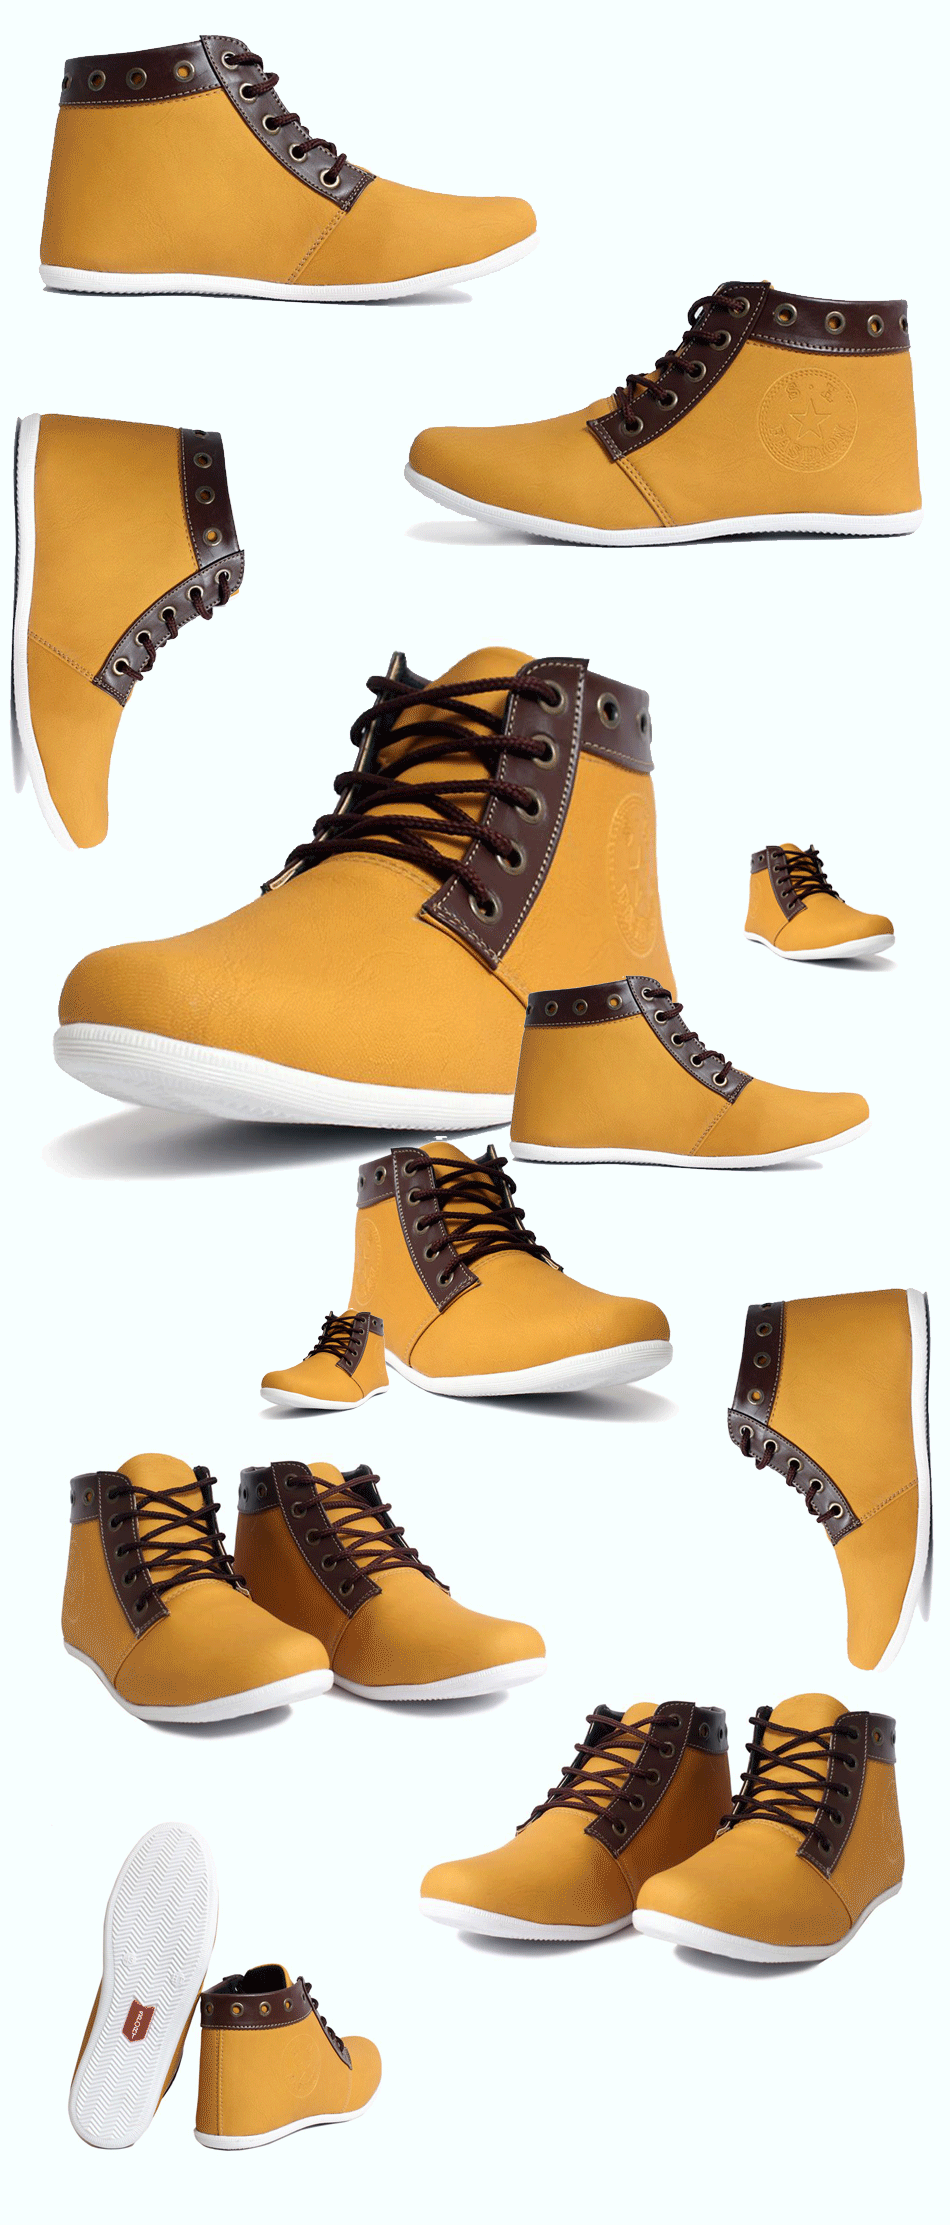 Casual Shoes Golden Yellow MBS-468